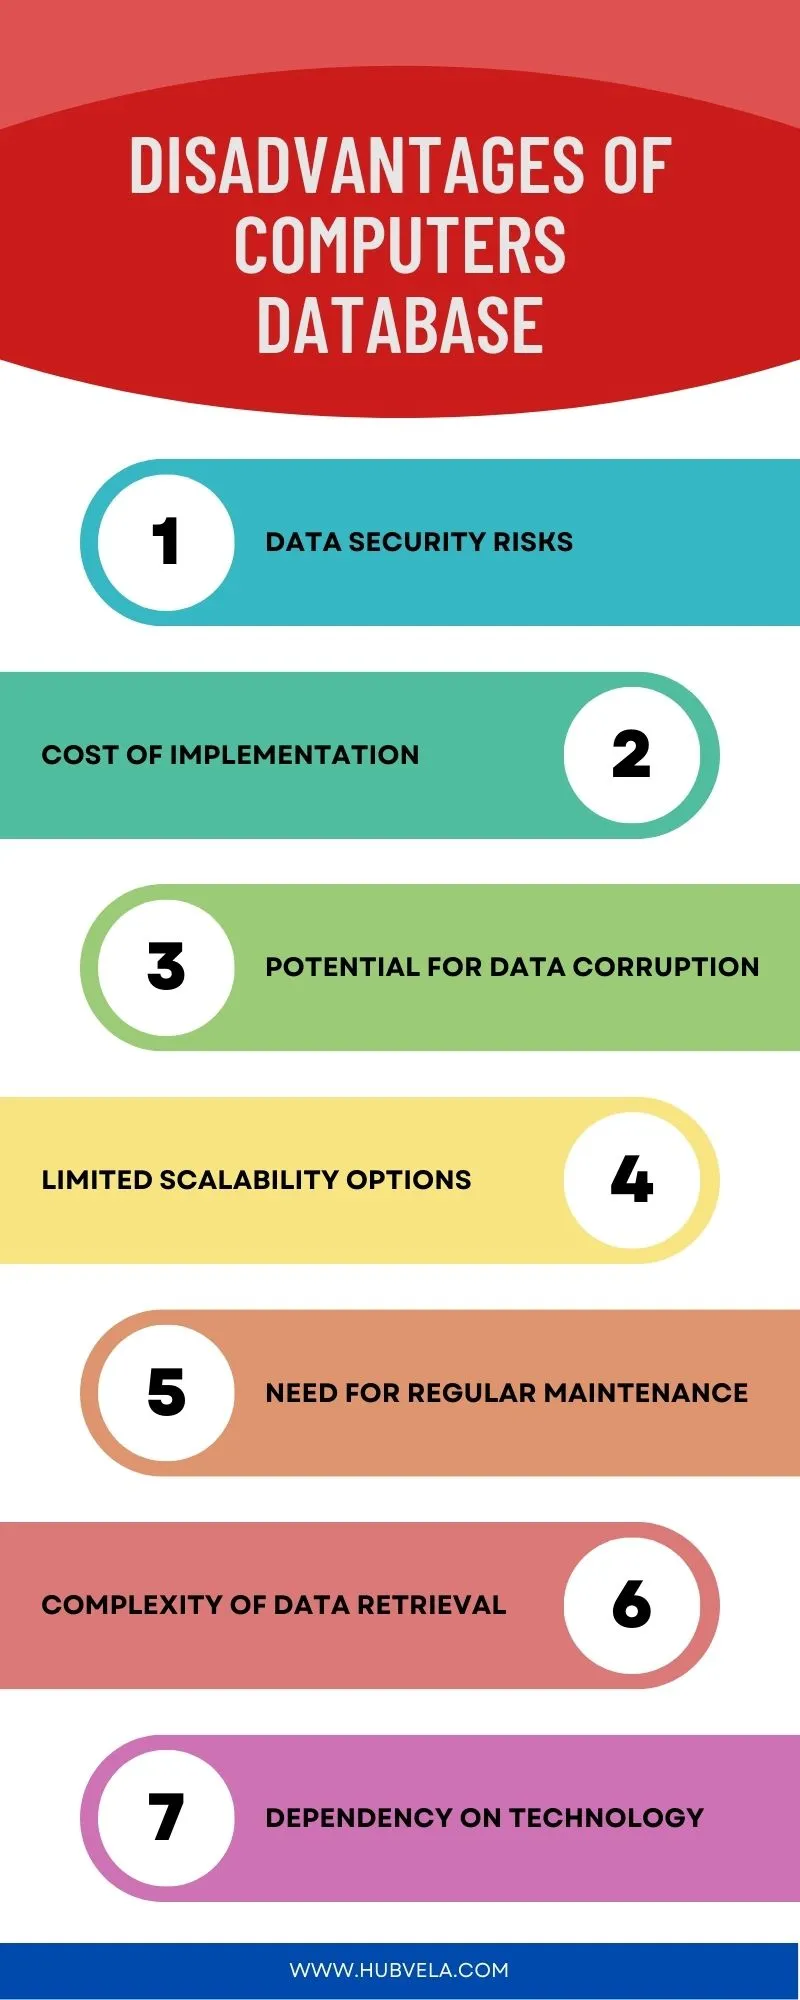 Disadvantages of Computers Database Infographic